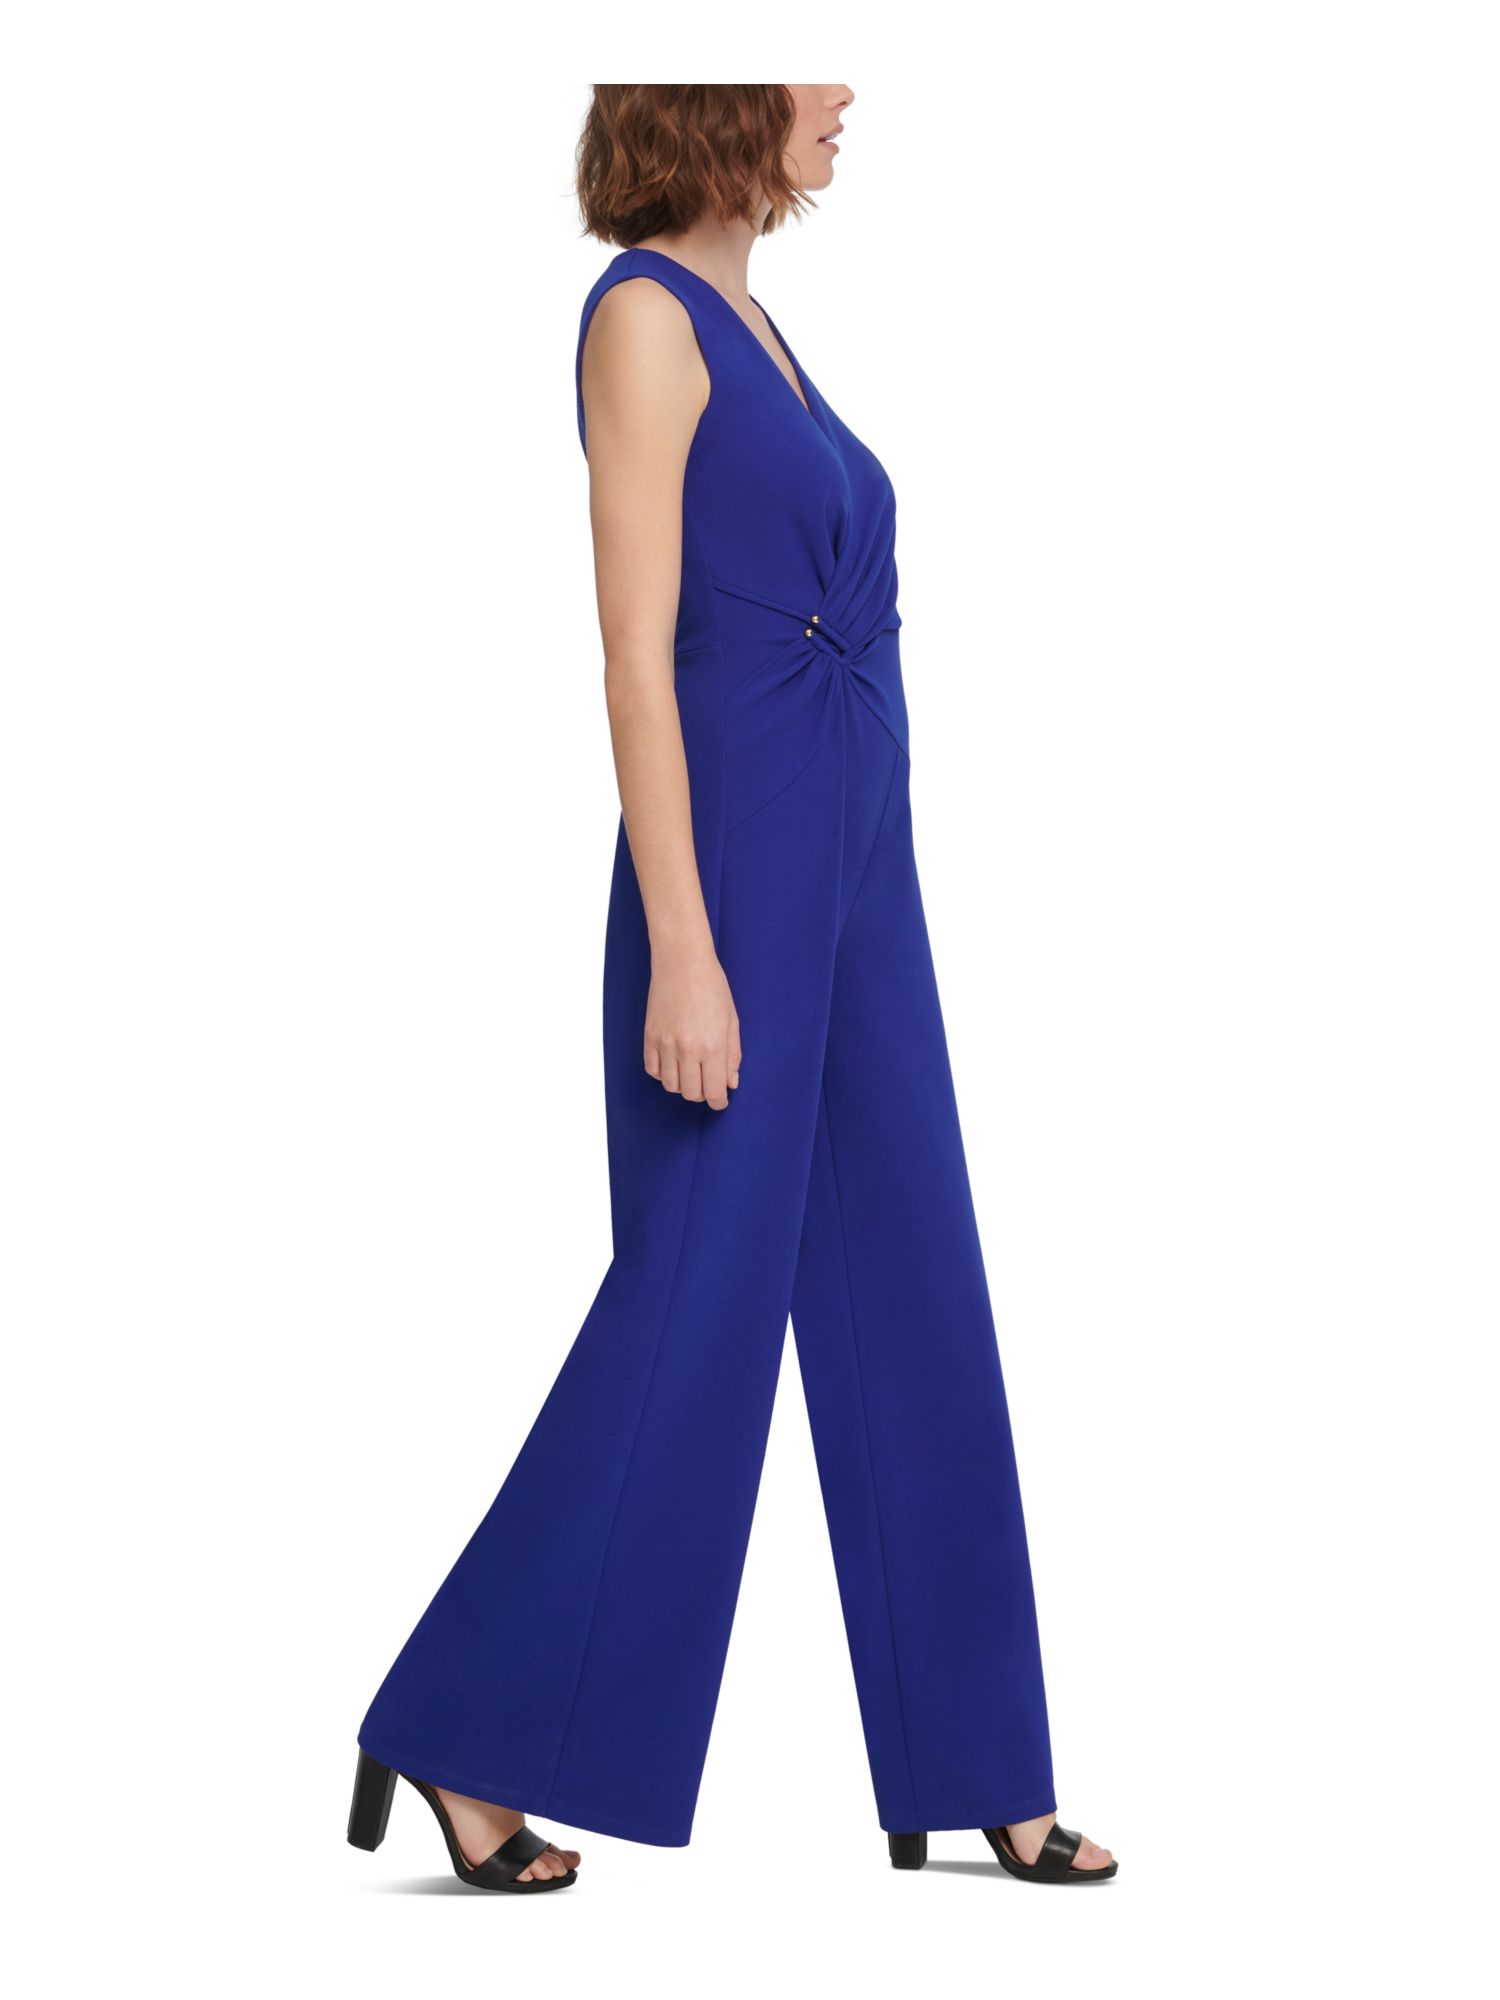 DKNY Womens Blue Ruched Asymmetrical Draped Sleeveless Surplice Neckline Party Wide Leg Jumpsuit 8